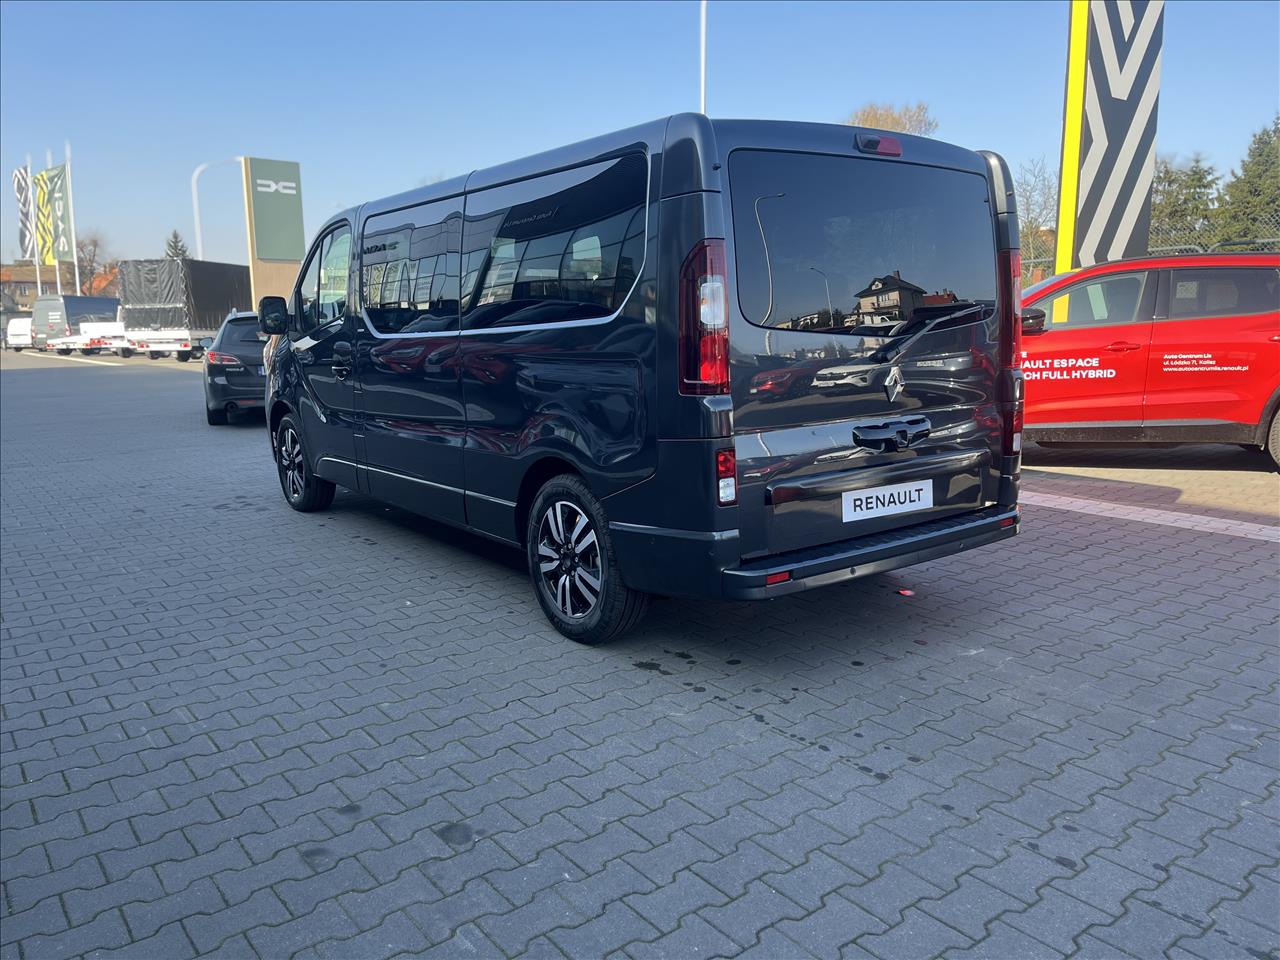 Renault TRAFIC SPACECLASS Trafic Grand SpaceClass 2.0 dCi EDC 2024